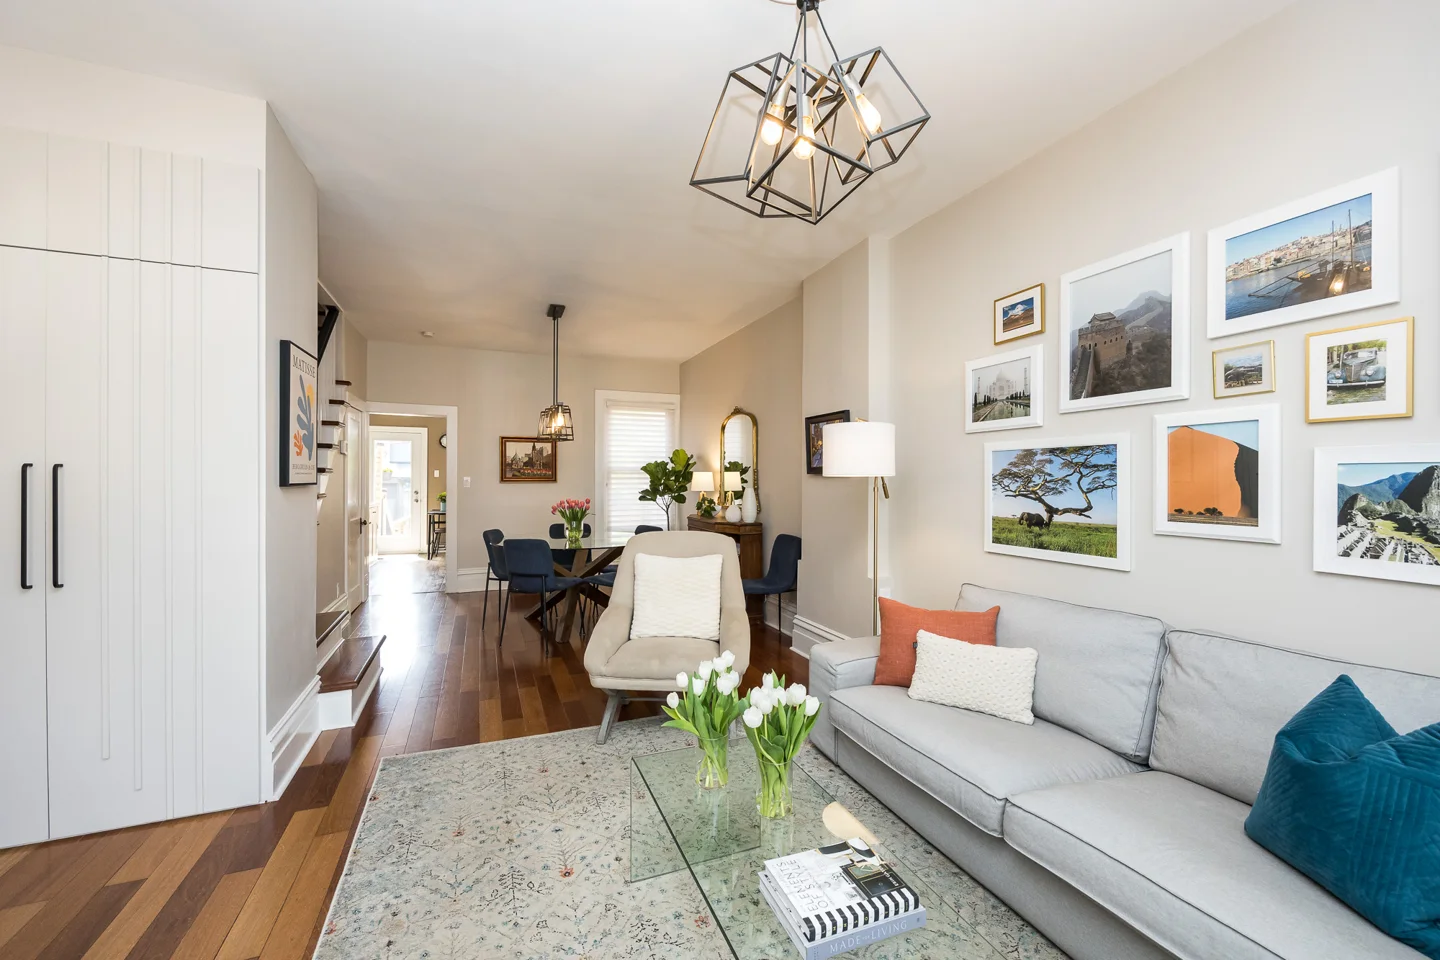 Experience comfort, charm, and the Glebe